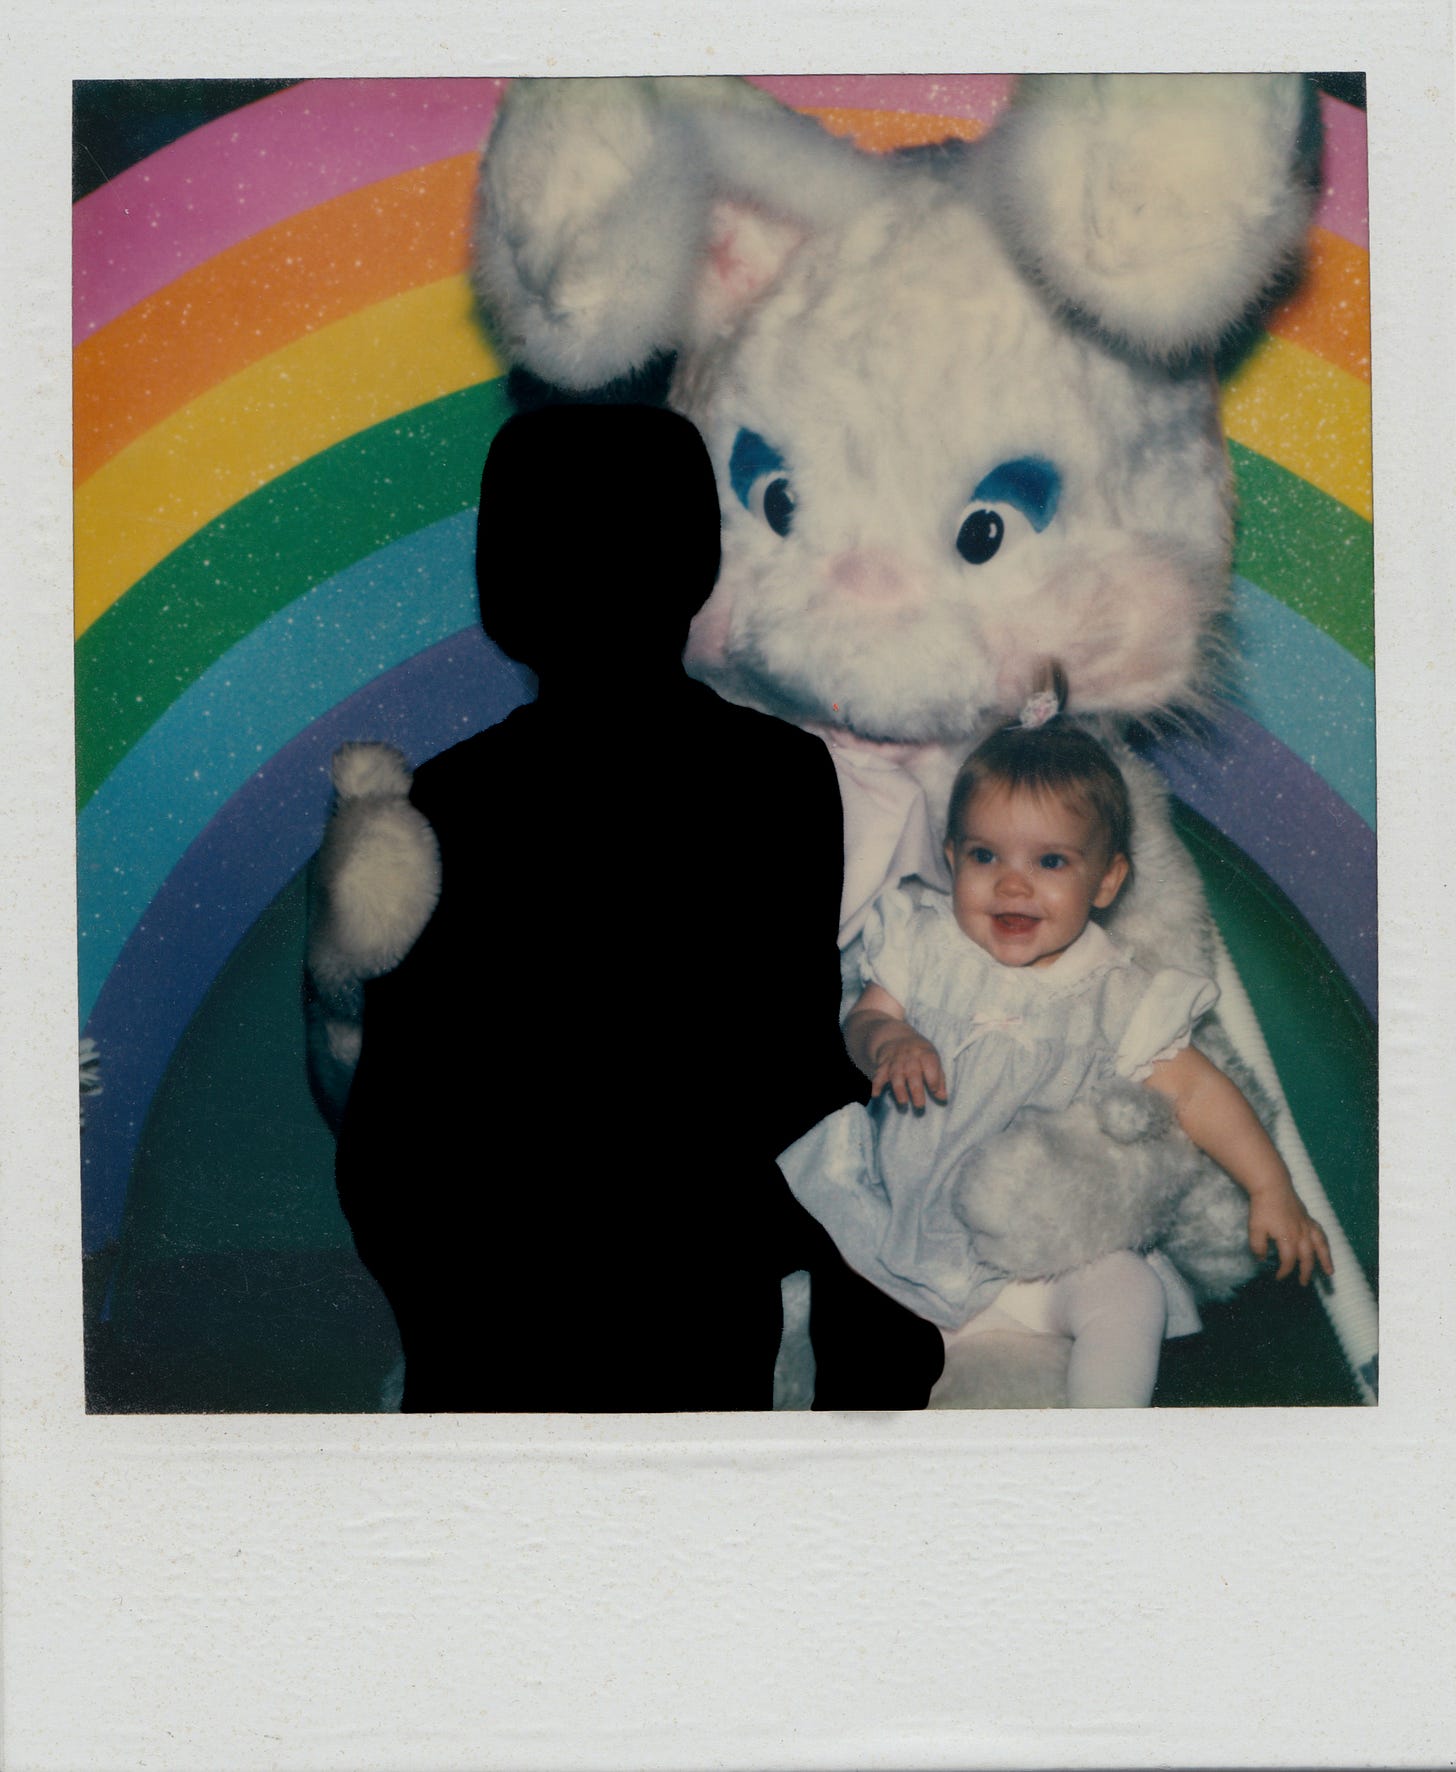 My brother and I with the Easter bunny in a Polaroid. I'm a baby and he is silhouetted black. 